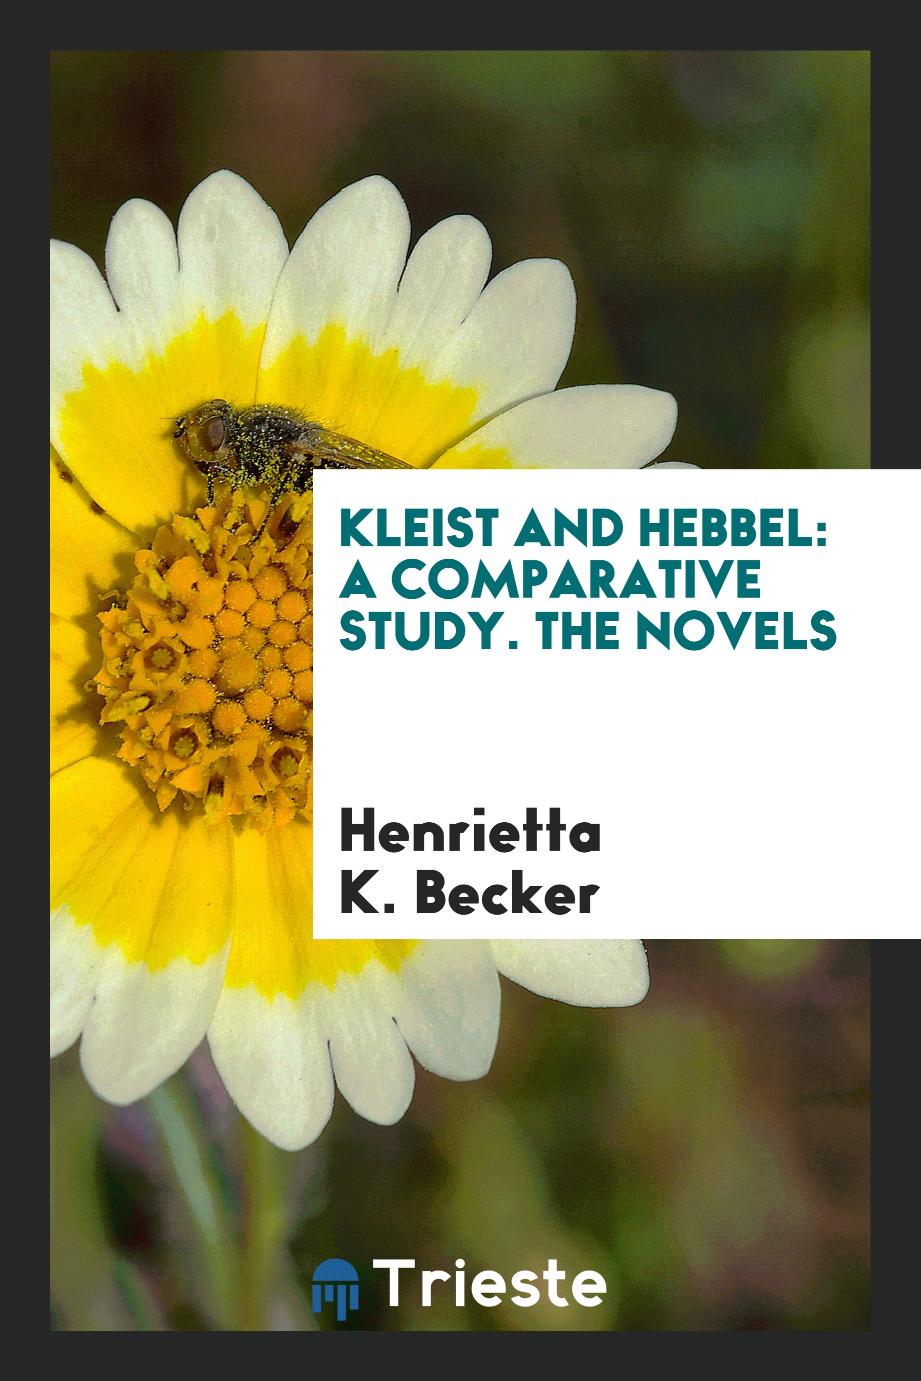 Kleist and Hebbel: A Comparative Study. The Novels